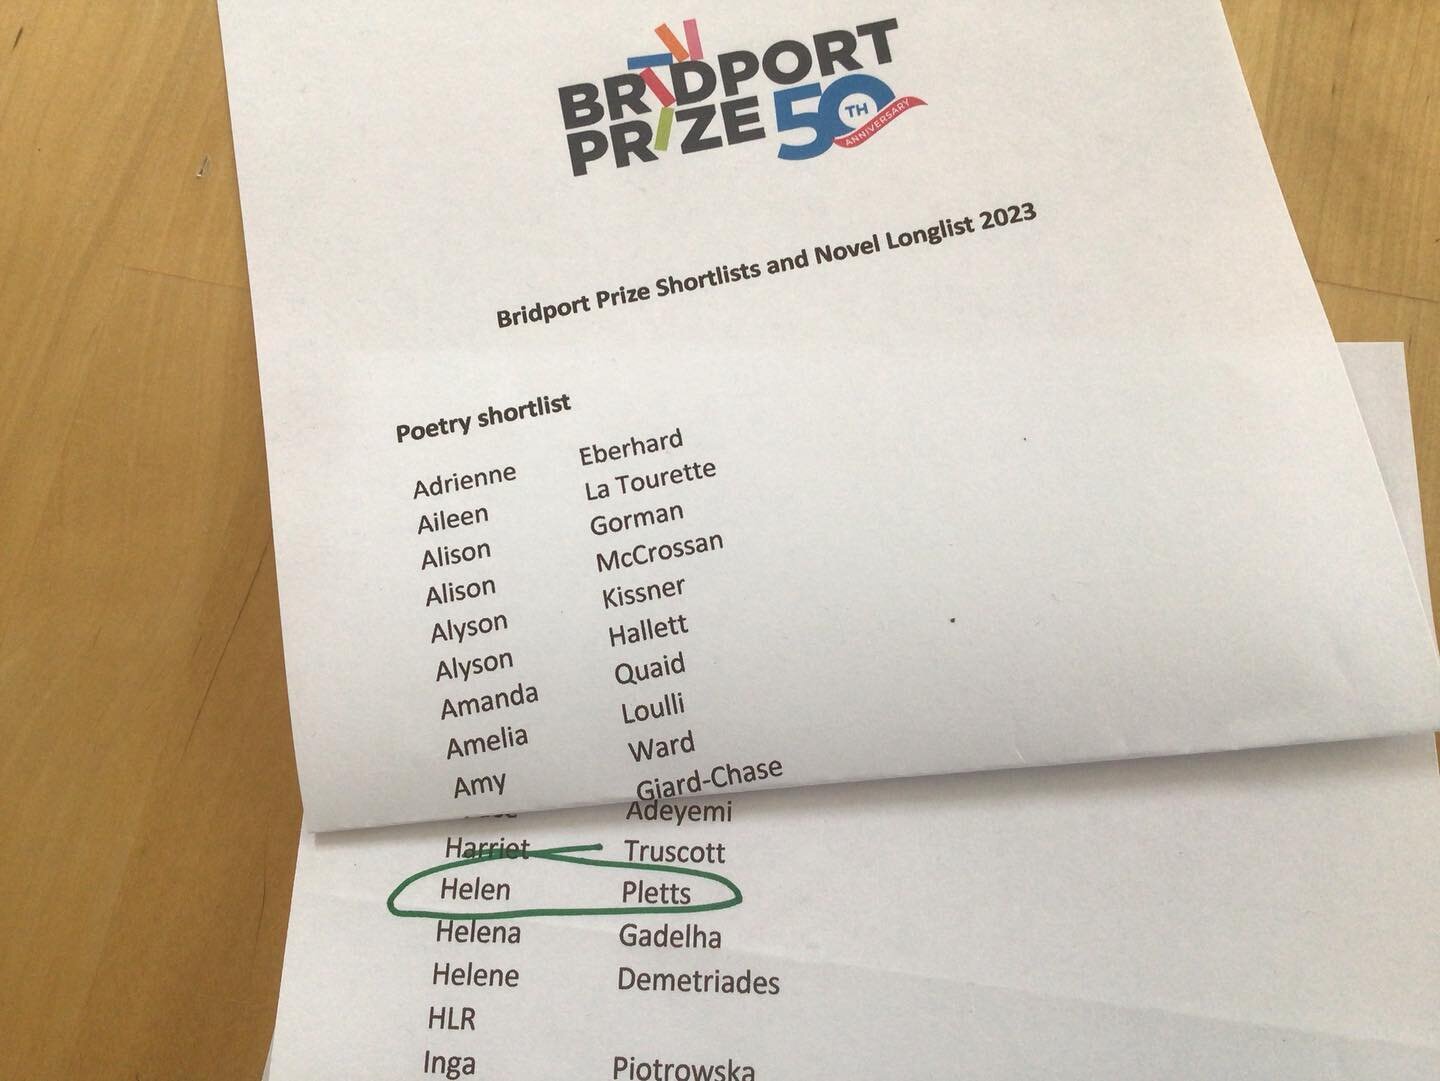 Congratulations to all ! Very happy to make the #2023 #bridportprize #poetry #shortlist (for the fourth time) #poetryofinstagram #bridport #poetryisnotdead #poetryislove #poetryforthesoul